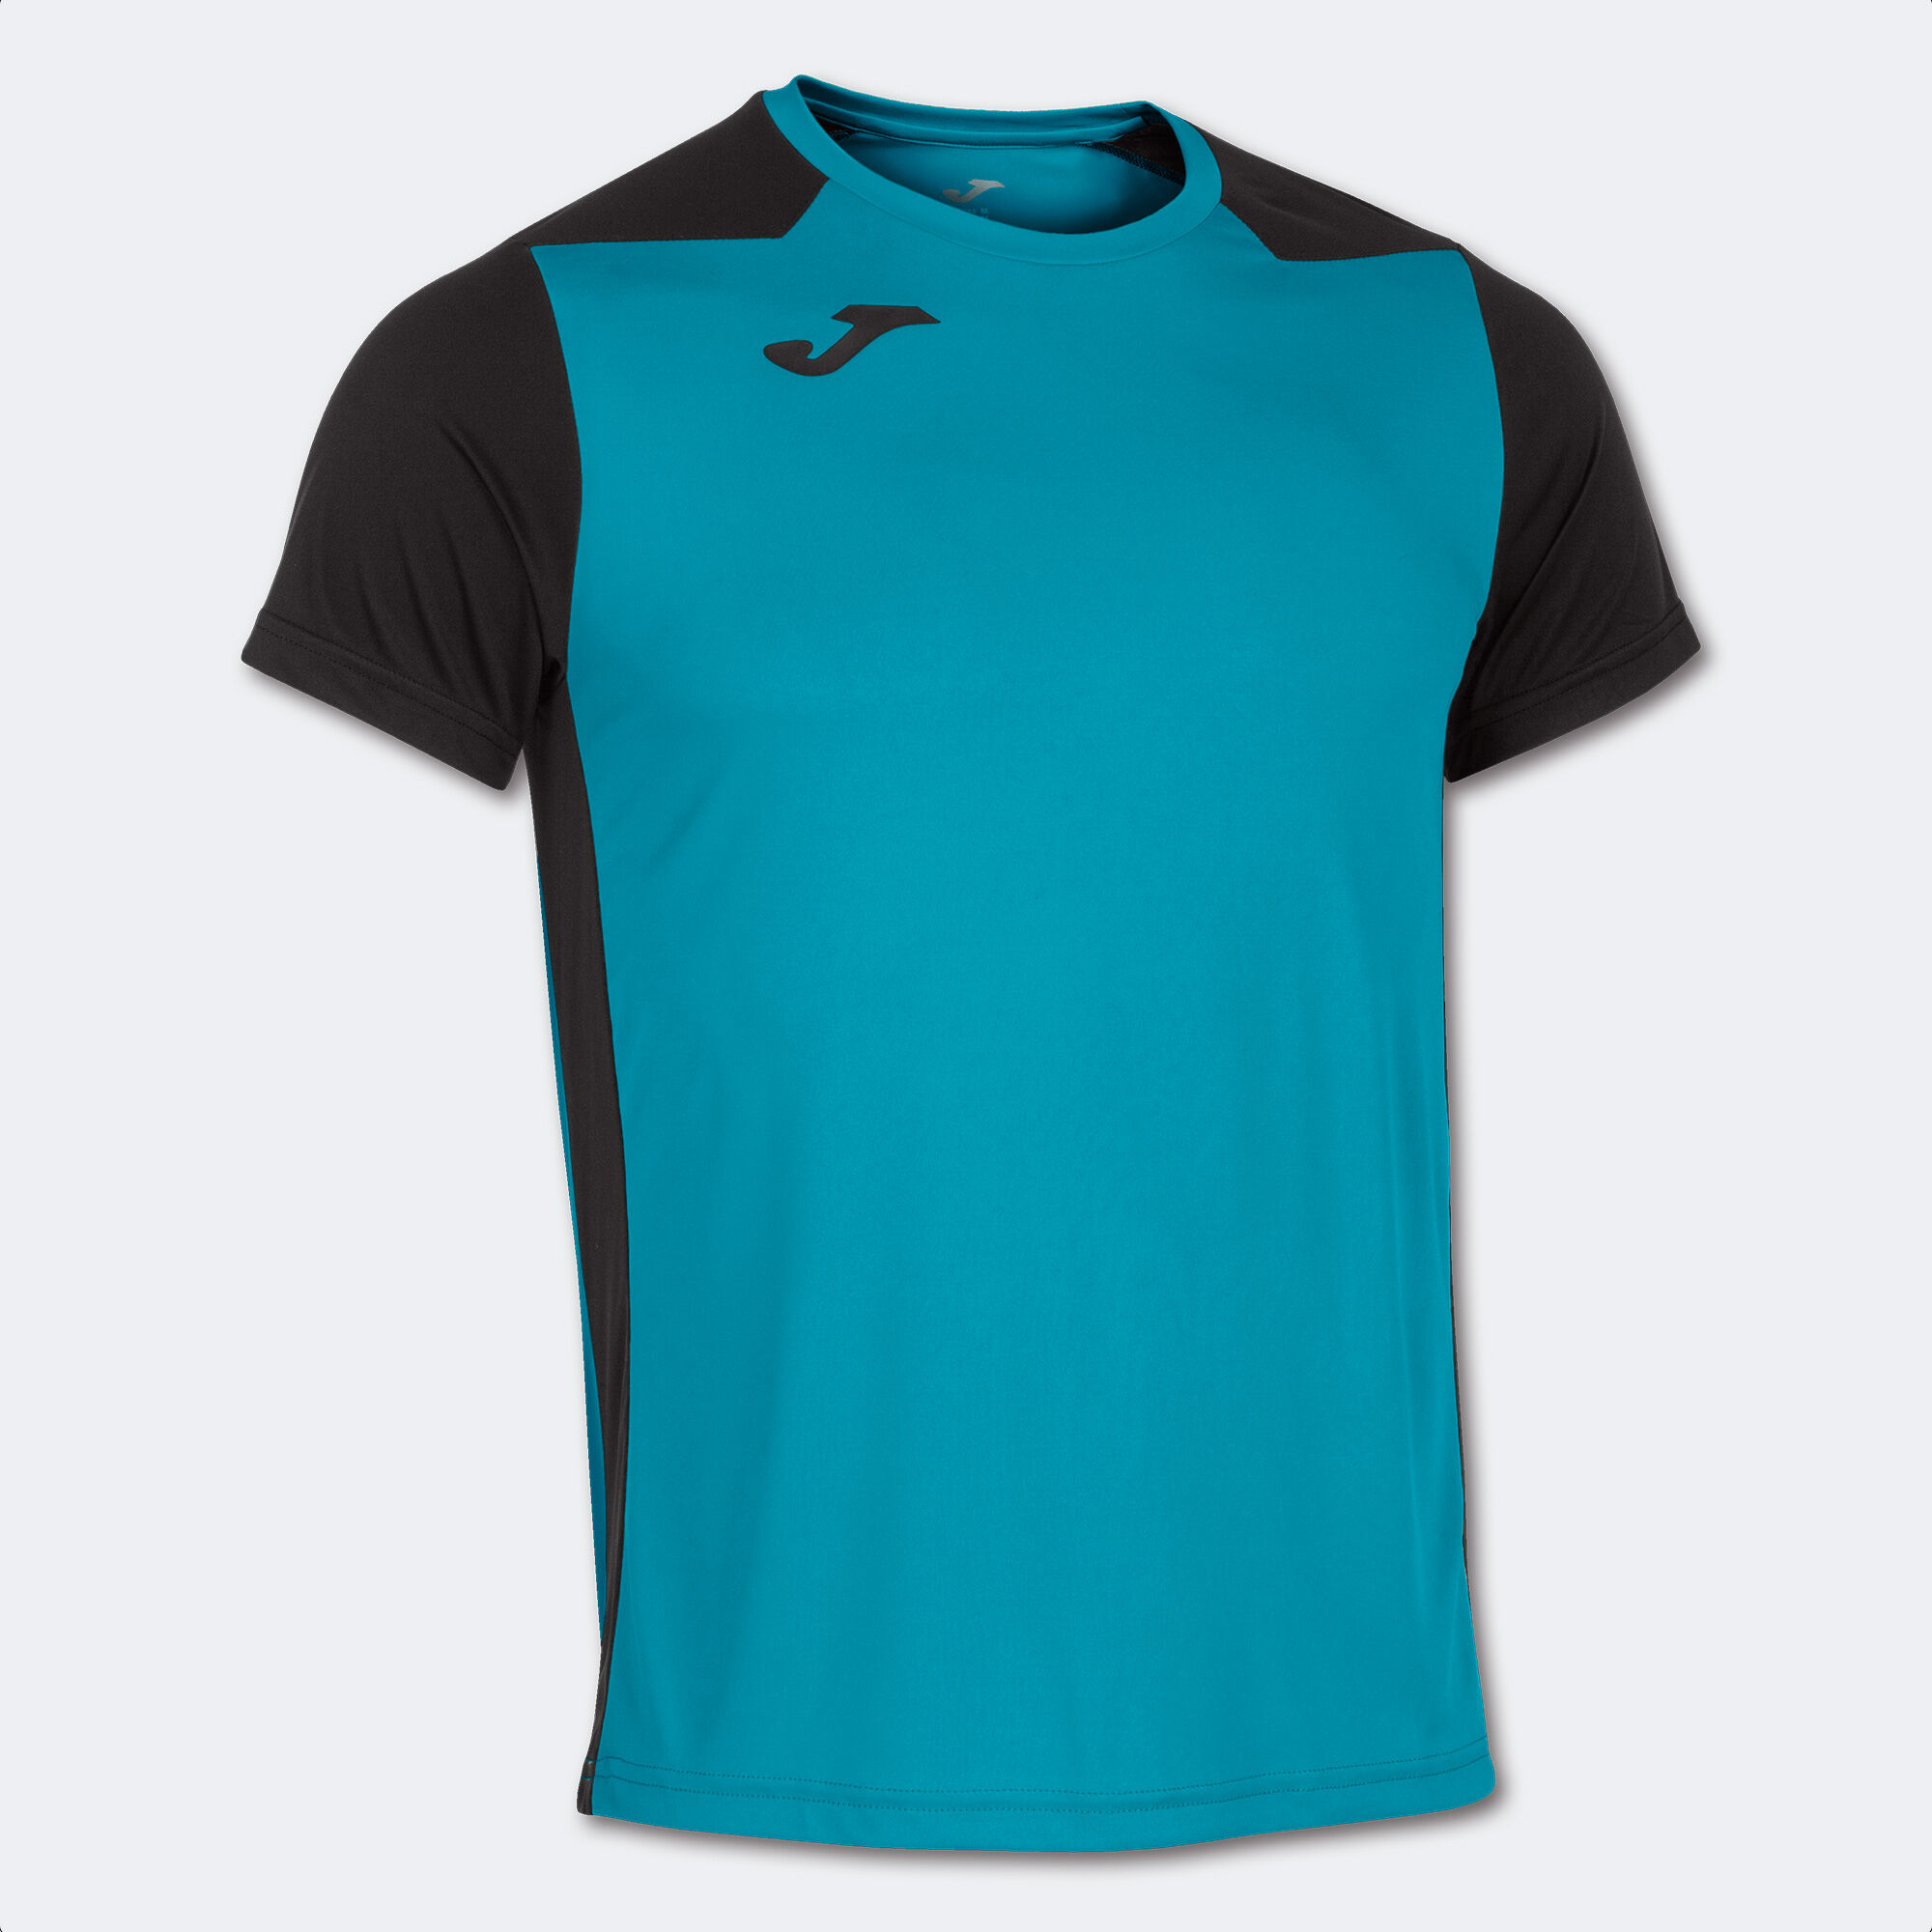 MAILLOT MANCHES COURTES HOMME RECORD II TURQUOISE NOIR